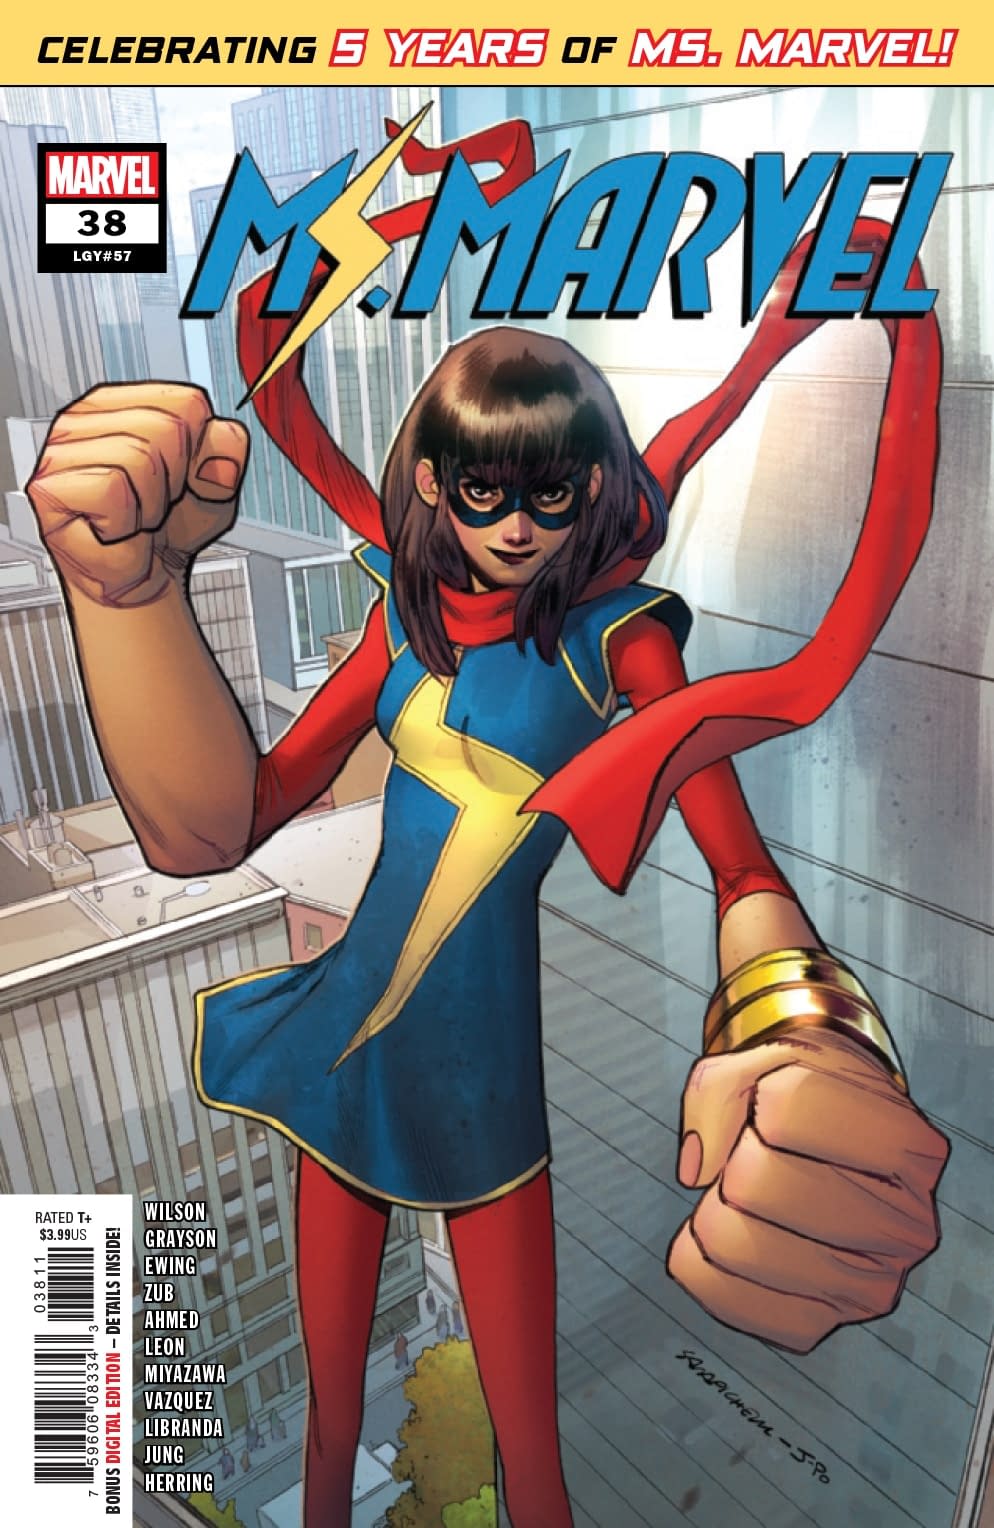 Is This Relaunch Fatigue in Next Week's Ms. Marvel Finale?